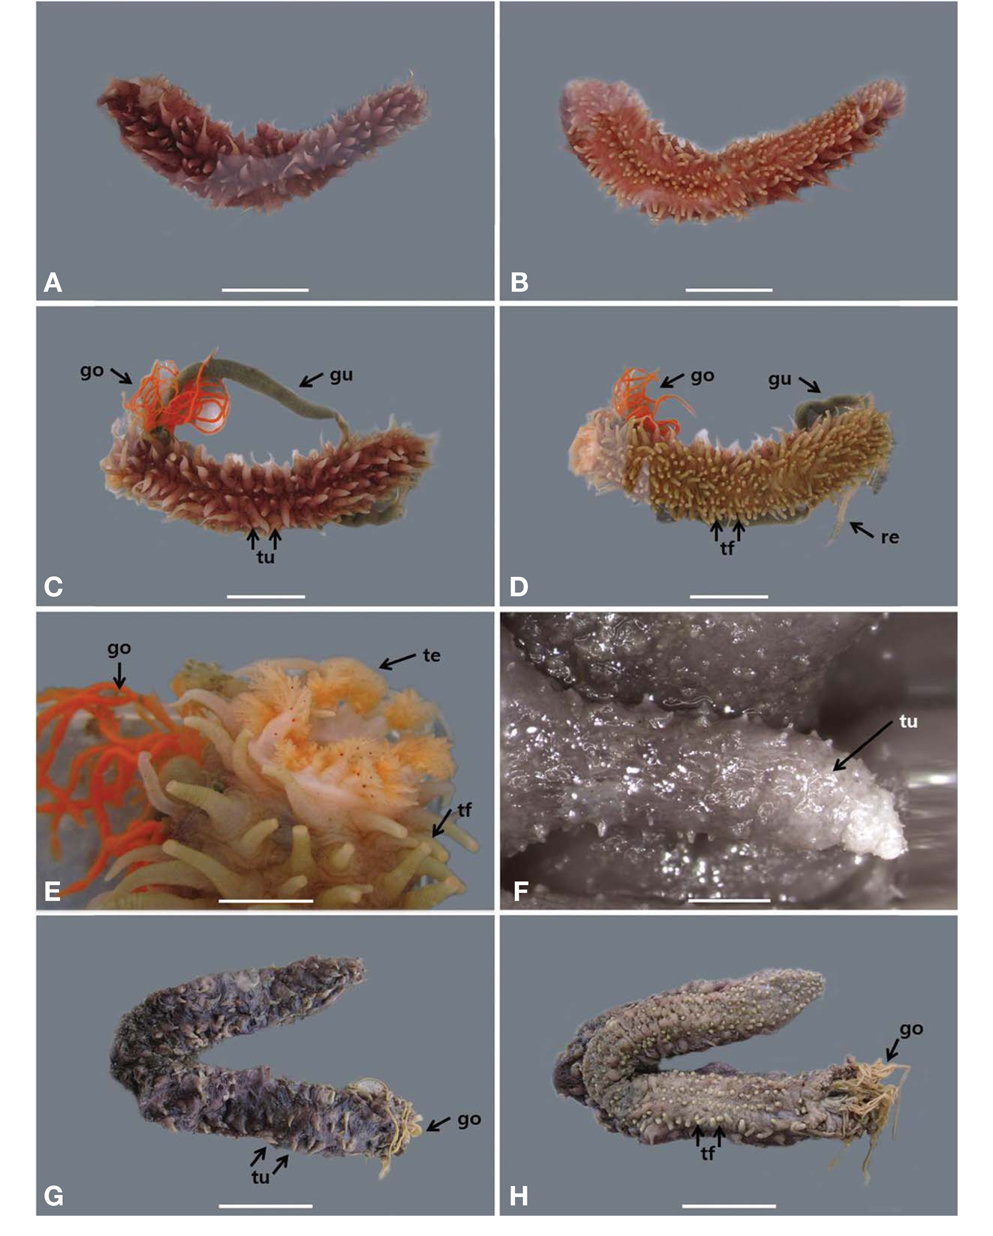 Synallactes nozowai. A-E, Specimens in life; F-H, Specimens in alcohol. A, G, Dorsal side; B, H, Ventral side; C, Dorsal side with extruded gonads and gut; D, Ventral side with extruded gonads and gut; E, Tentacles, tube feet and gonads; F, Dorsal tubercle with small warts. go, gonad; gu, gut; re, respiratory tree; te, tentacle; tf, tube feet; tu, tubercle. Scale bars: A-D, G, H=3 cm, E=2cm, F=1mm.